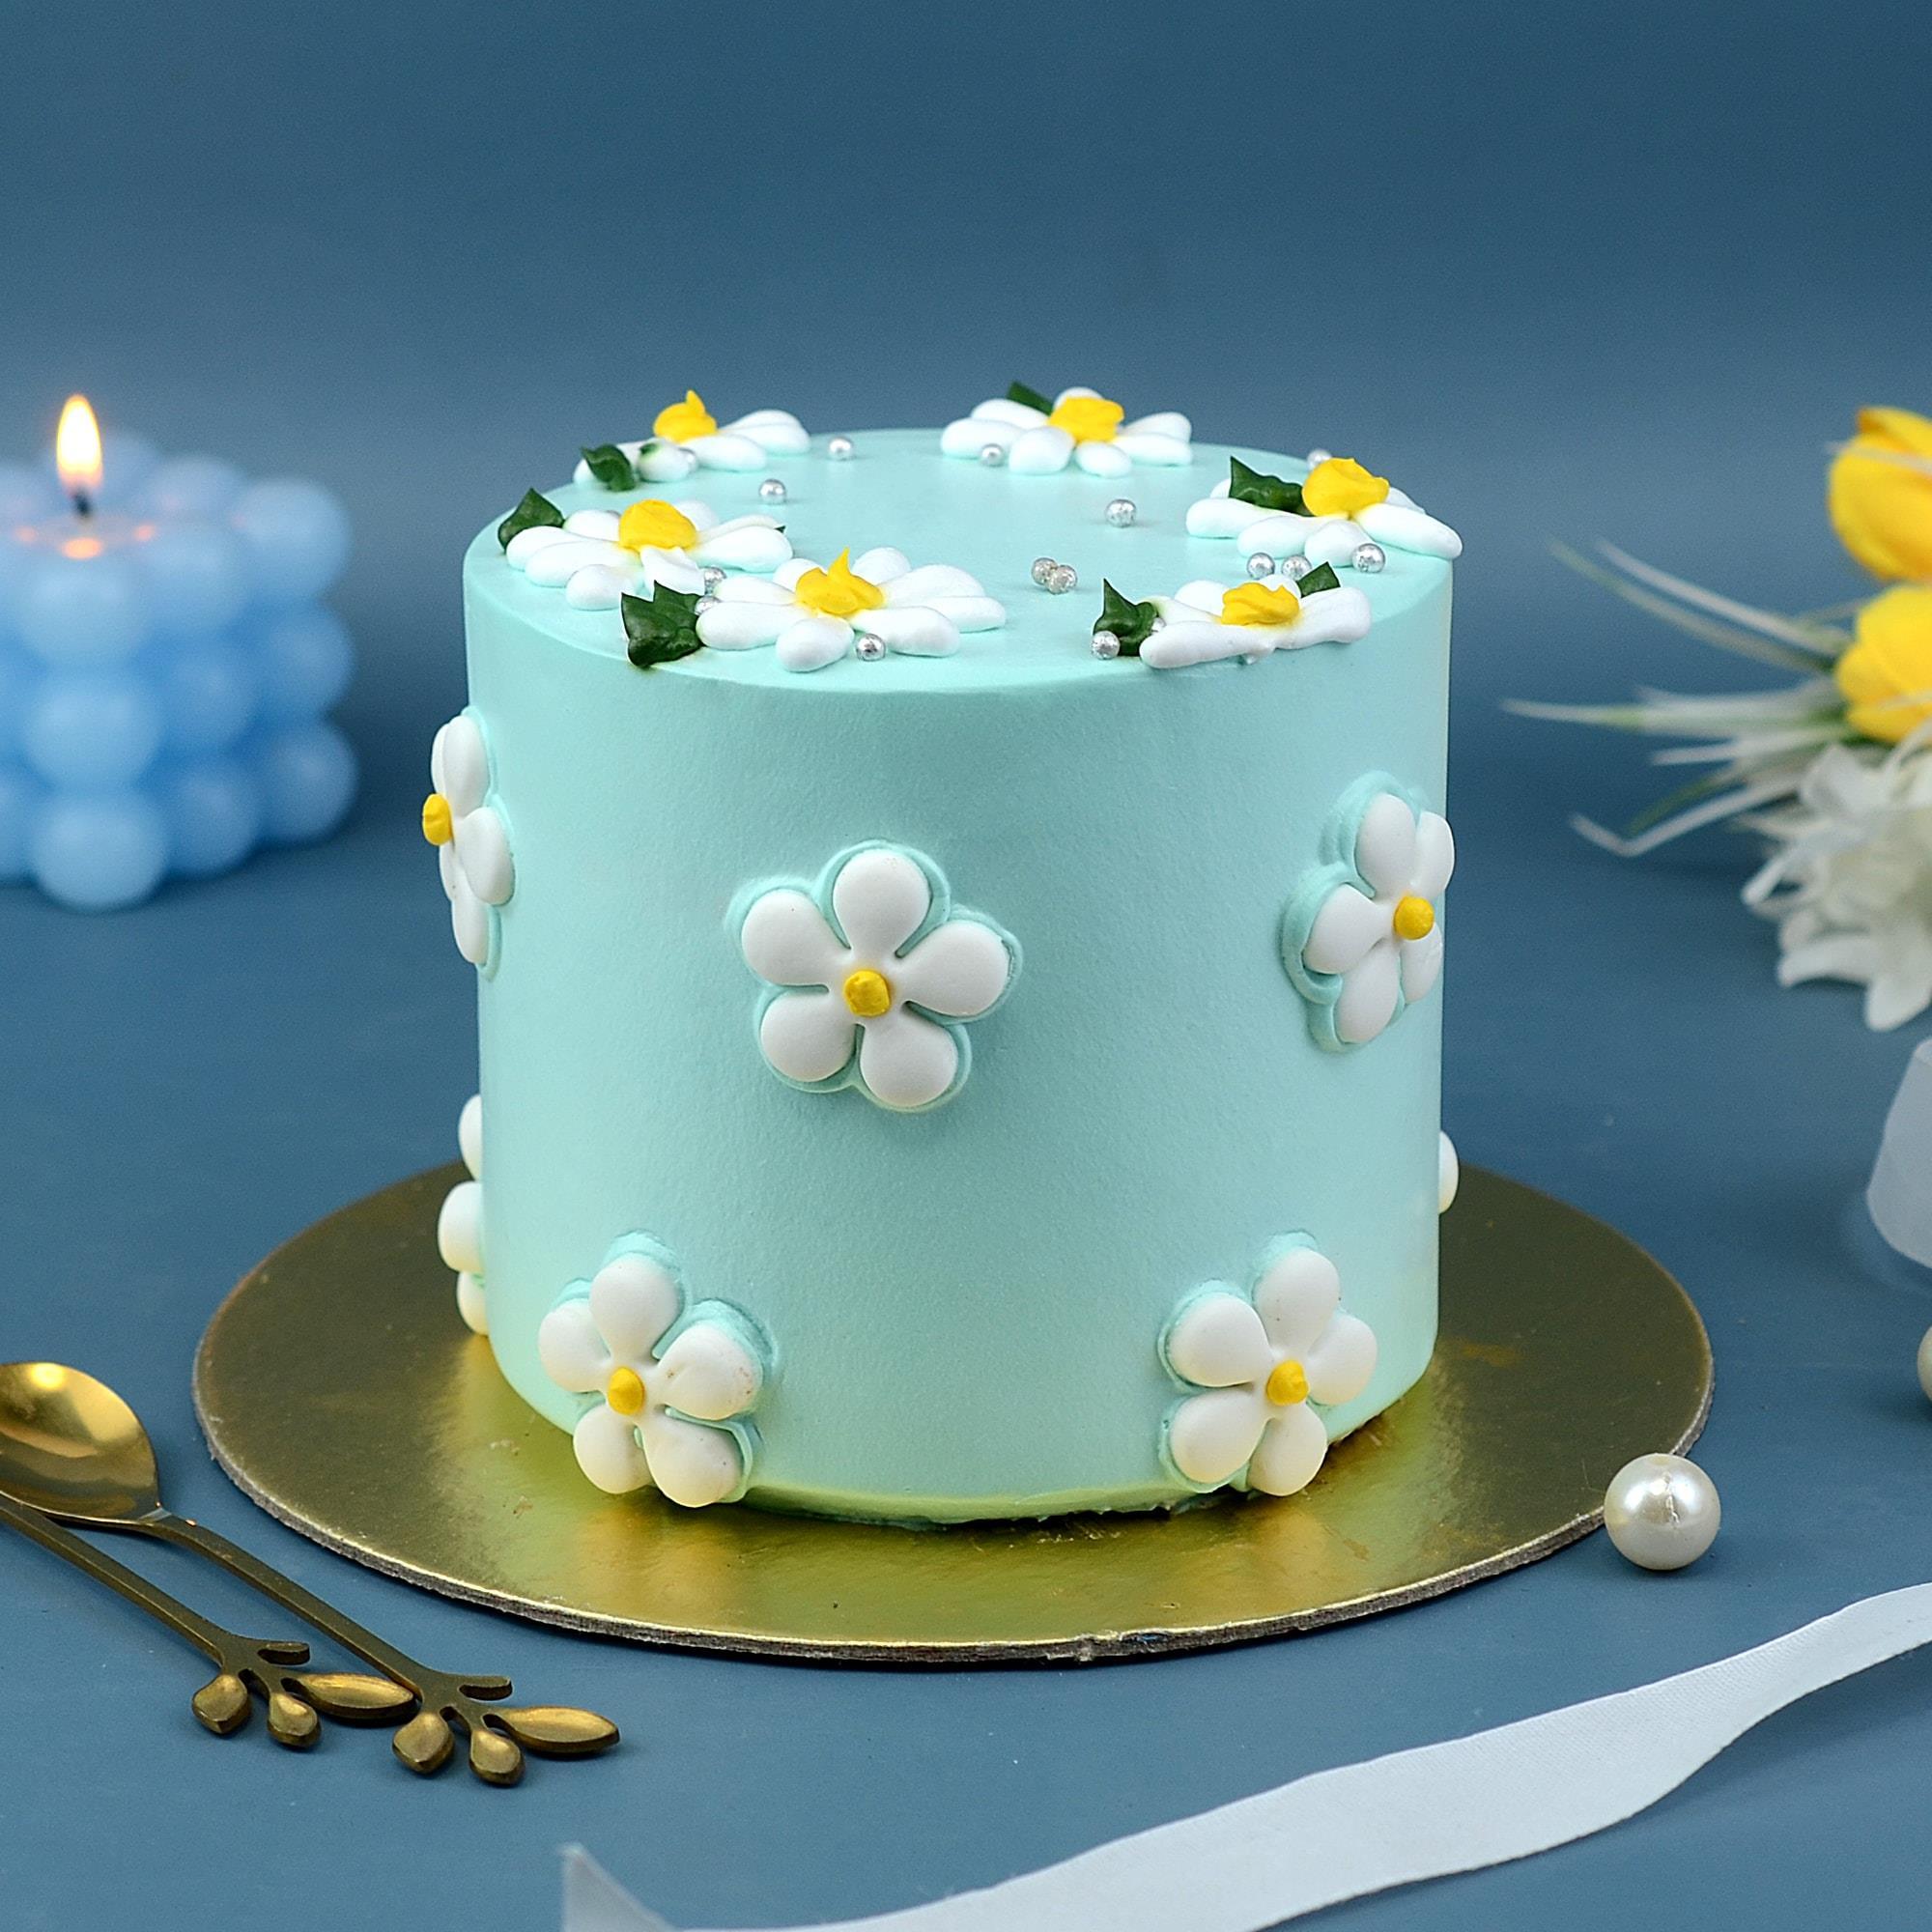 17 Stunning Birthday Cake Recipes for Special Occasions - Baker by Nature